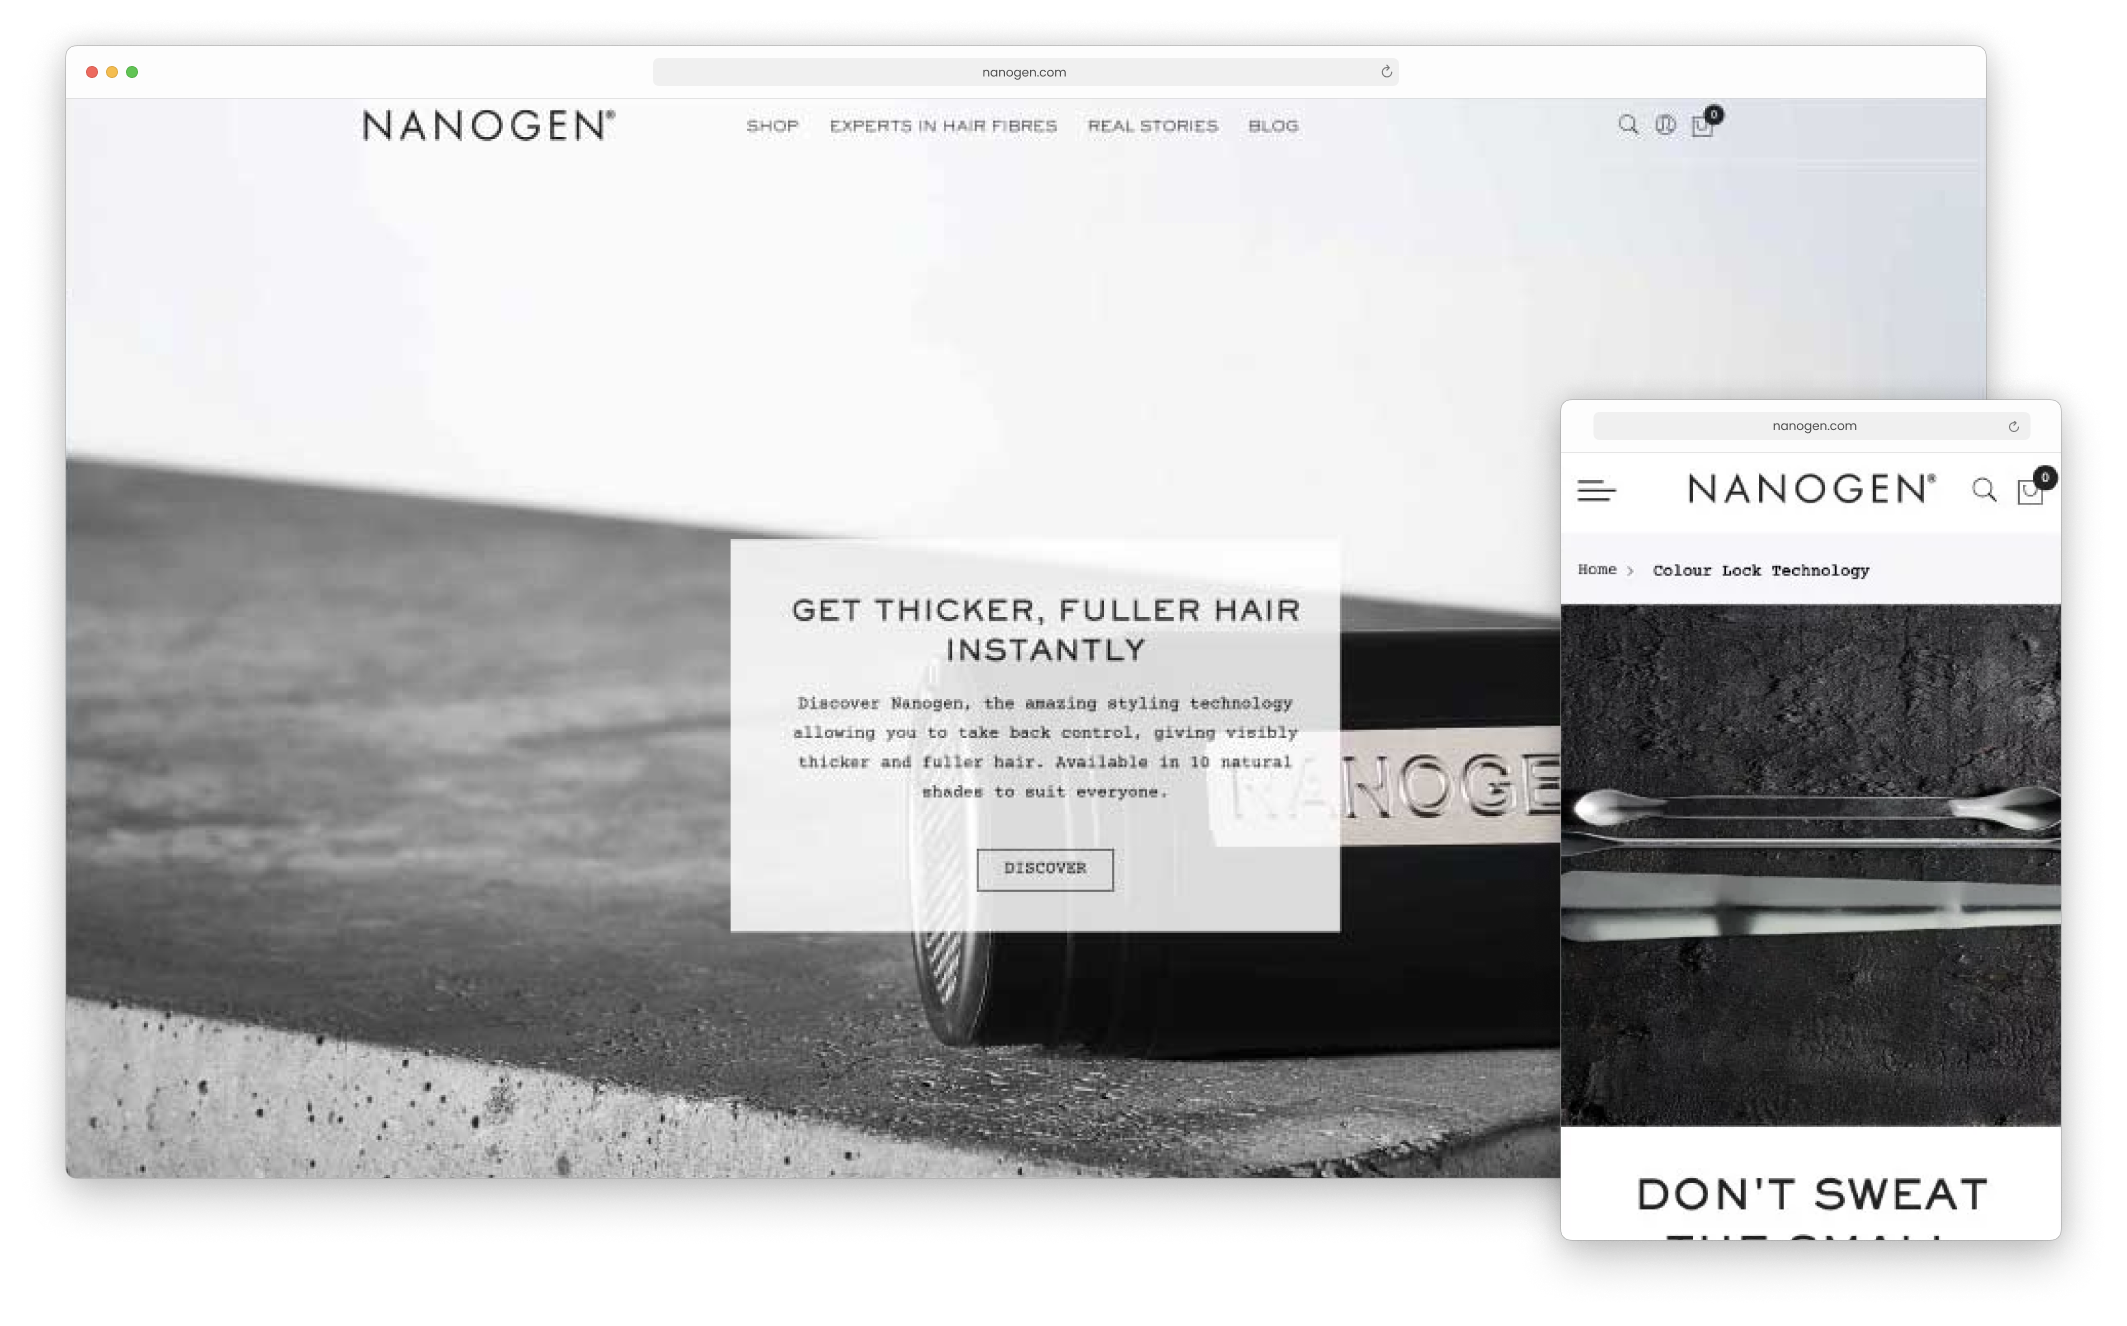 Nanogen's new website, delivered by Magento experts at eCommerce development agency, magic42